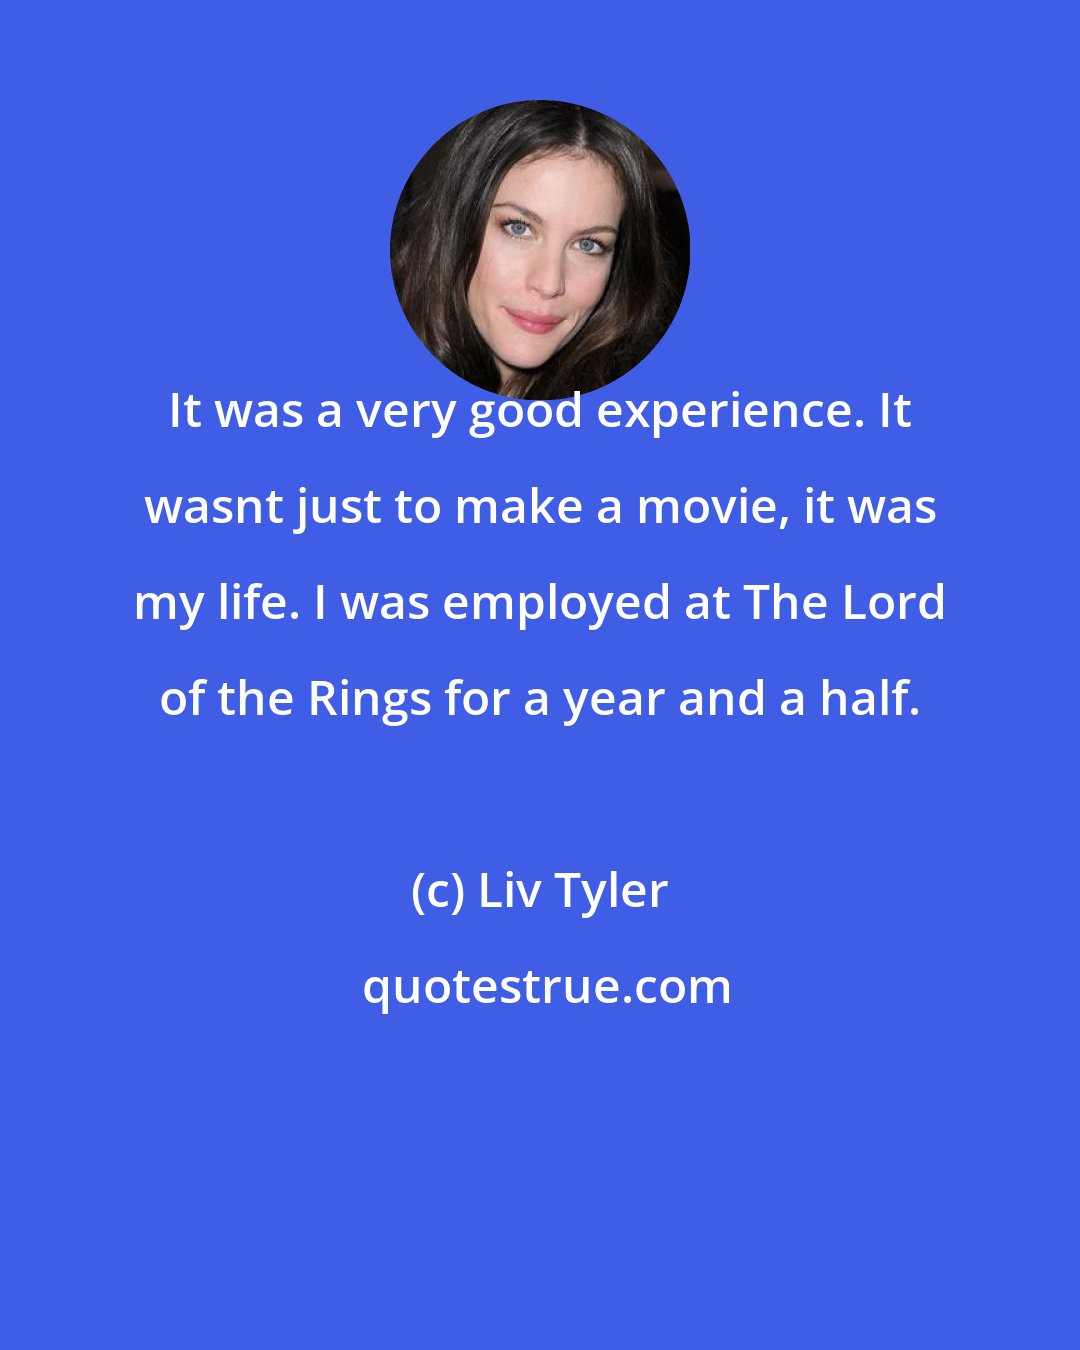 Liv Tyler: It was a very good experience. It wasnt just to make a movie, it was my life. I was employed at The Lord of the Rings for a year and a half.